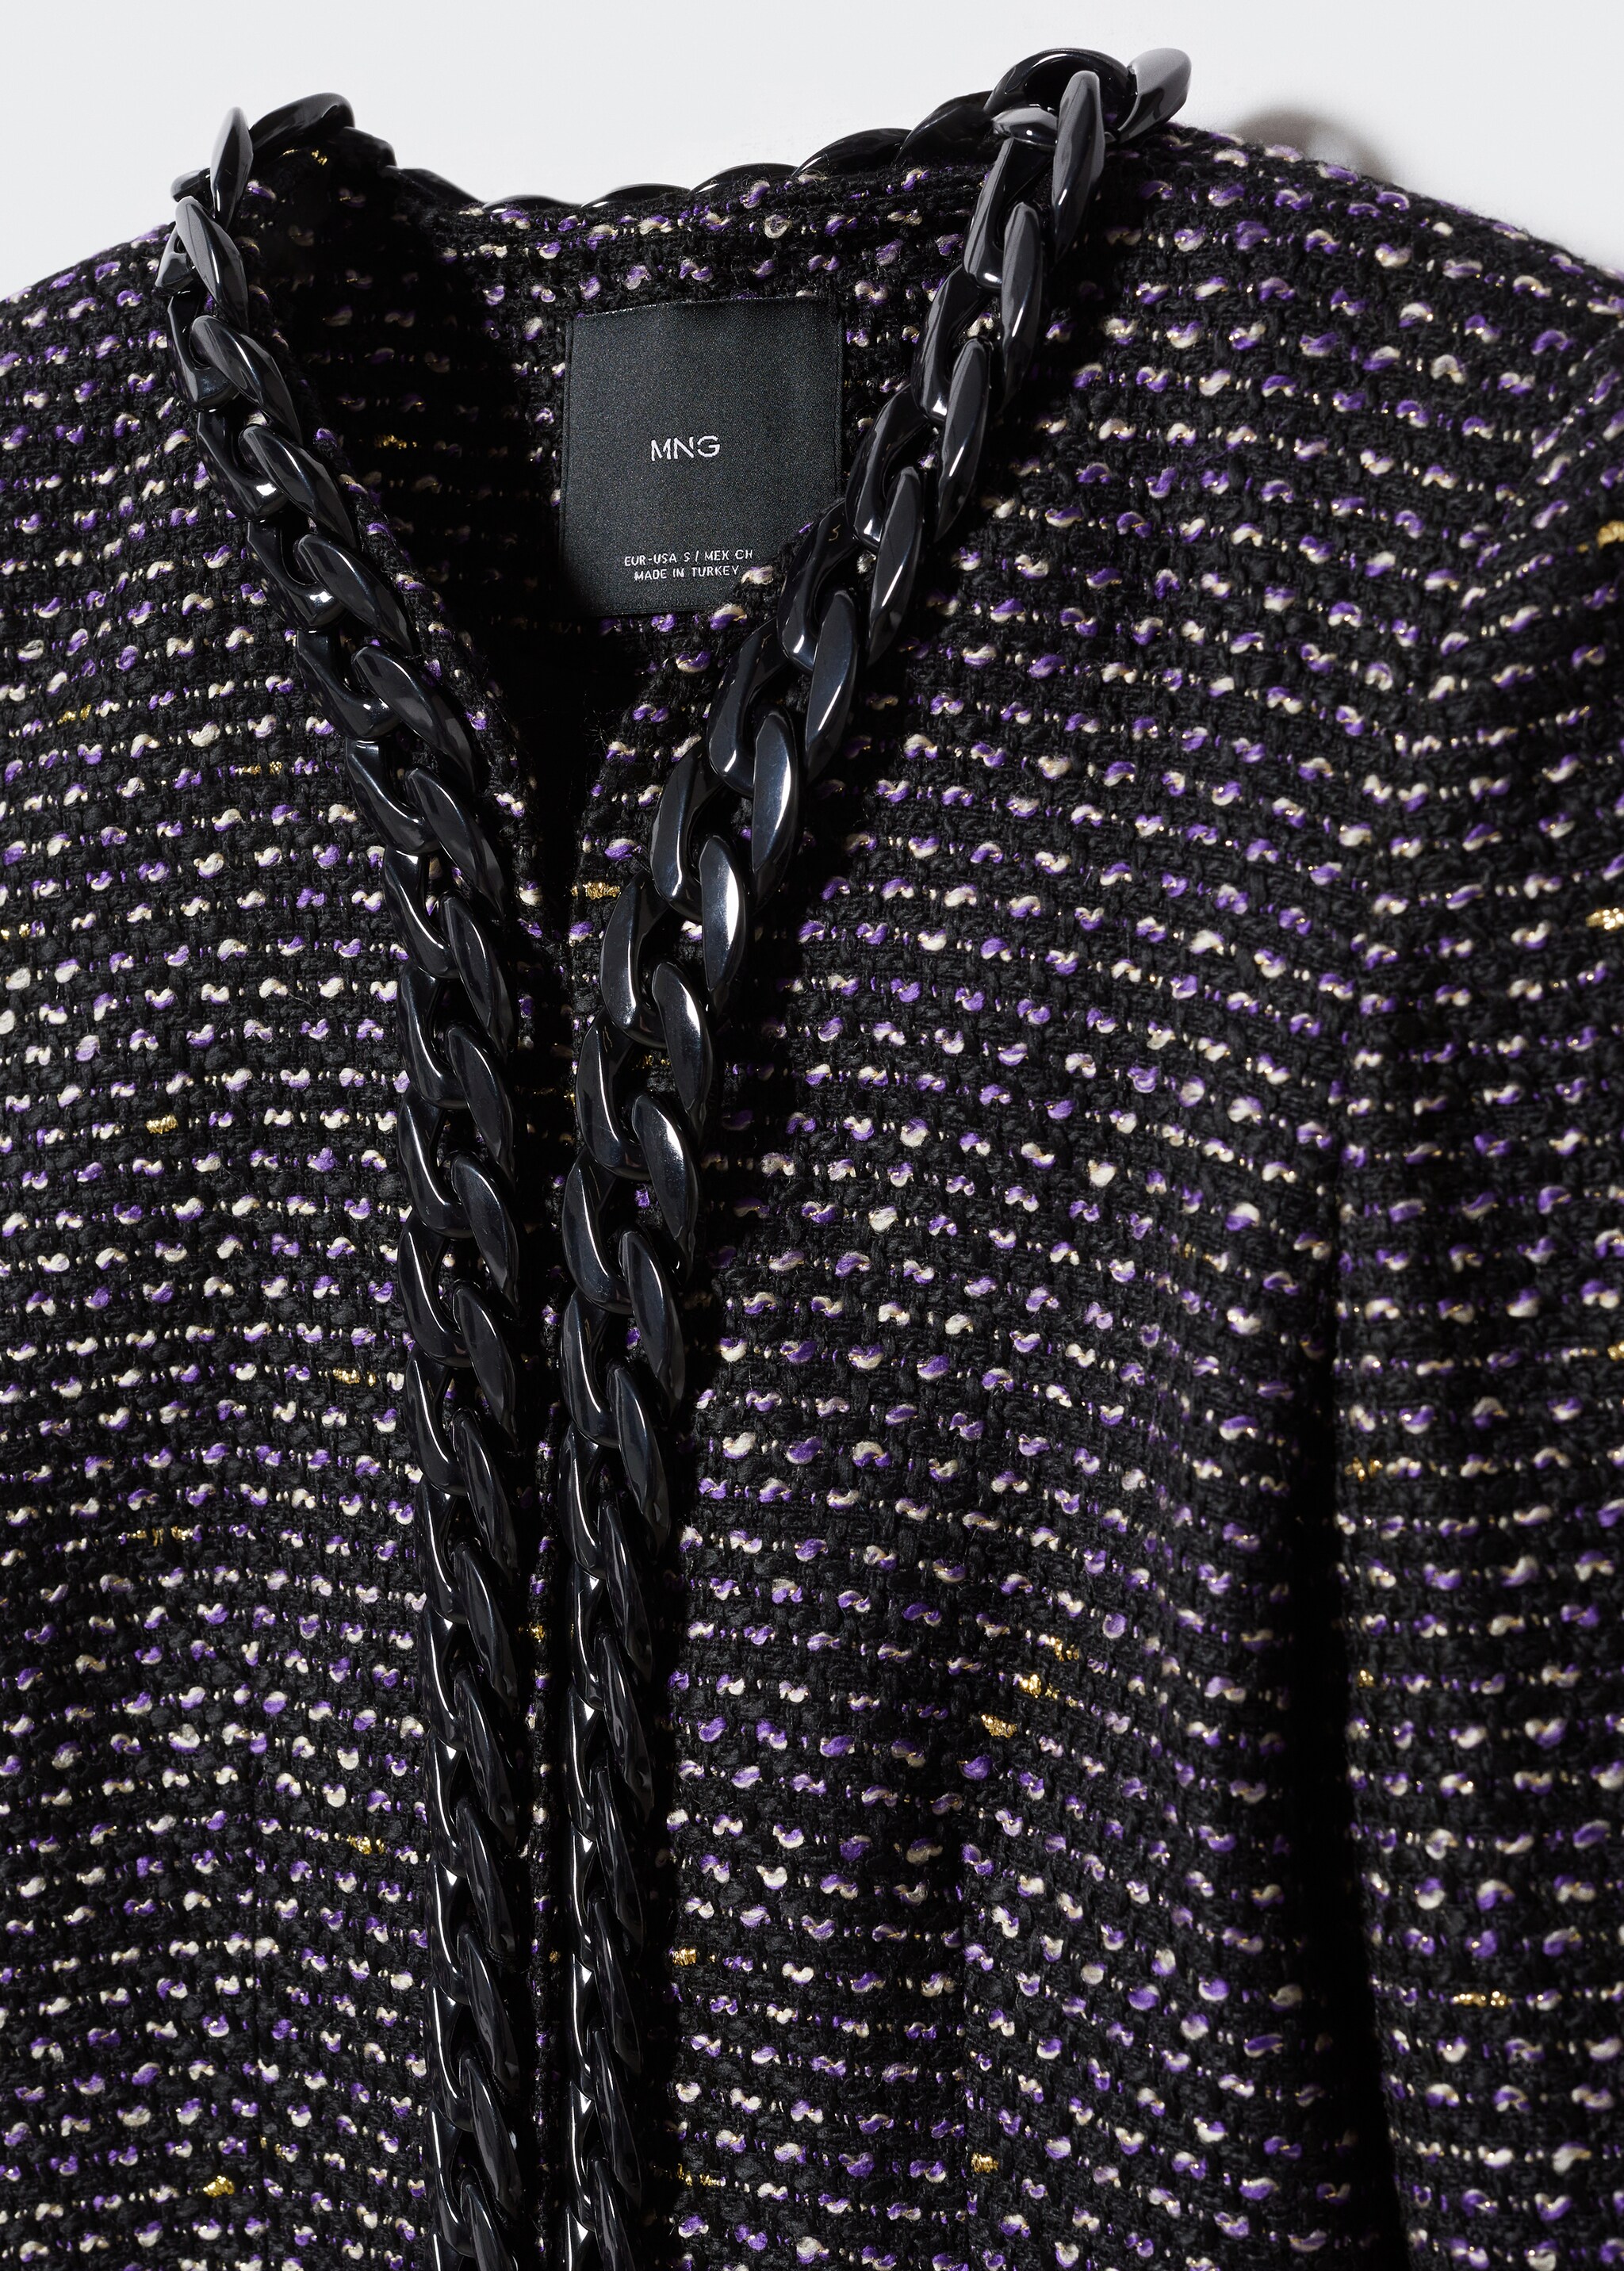 Tweed chain jacket - Details of the article 8